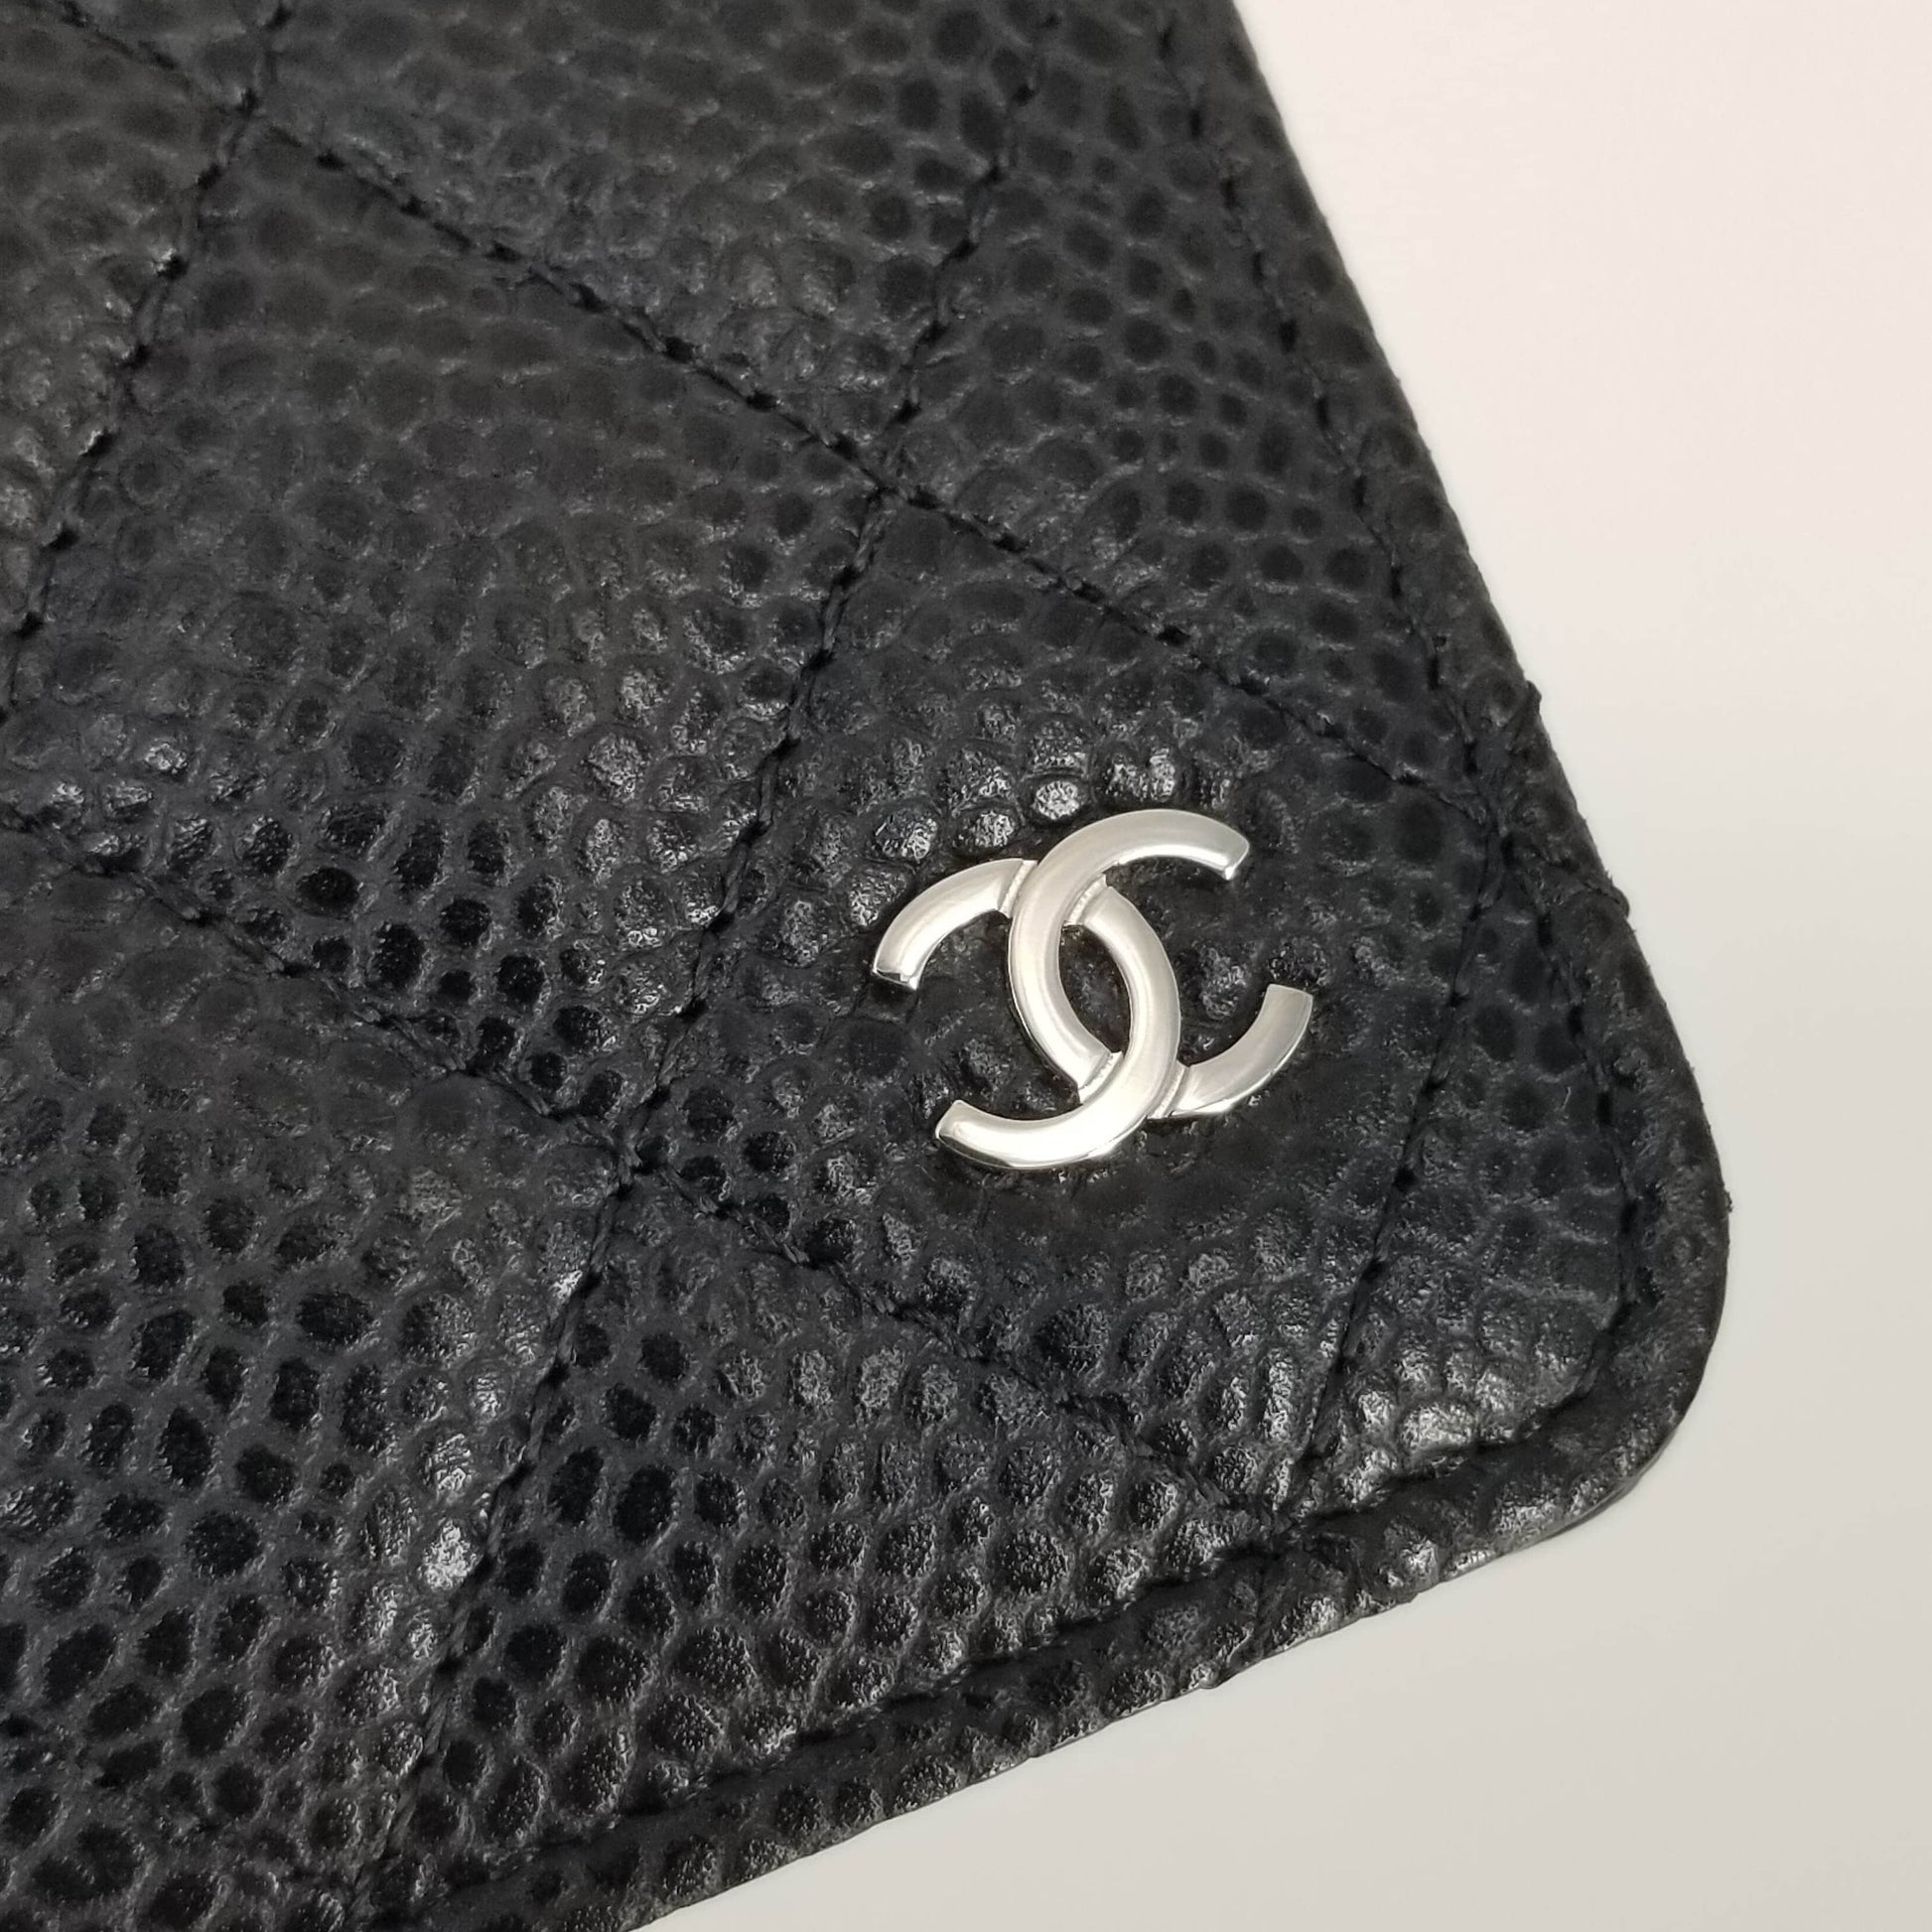 phone case chanel iphone 6